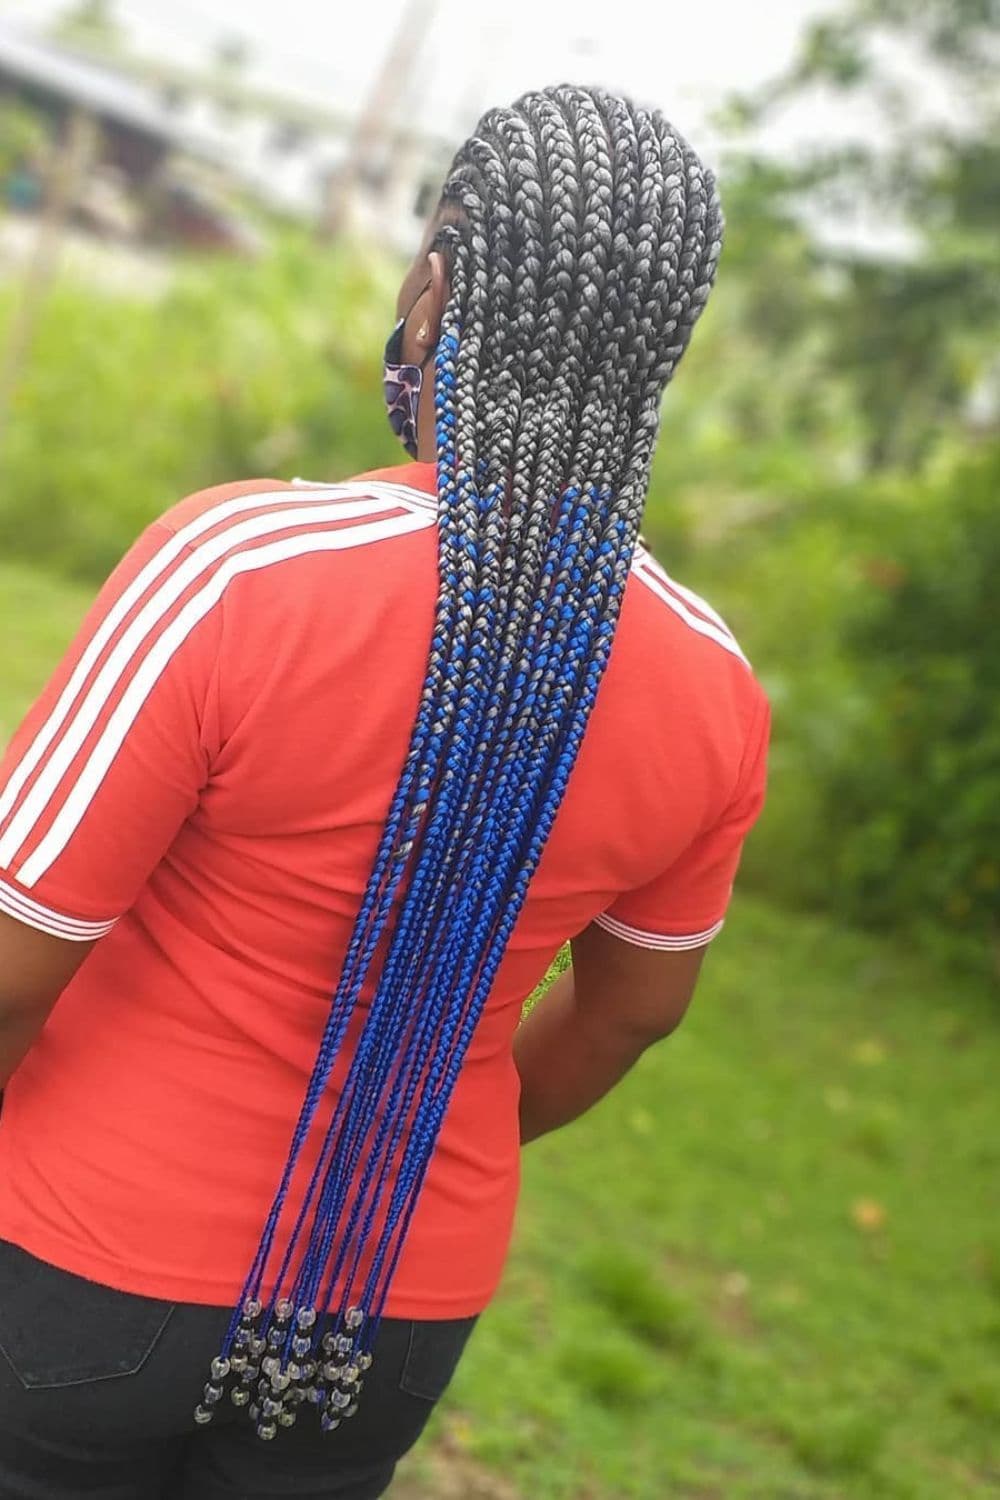 A woman with blue ombre cornrows with beads.